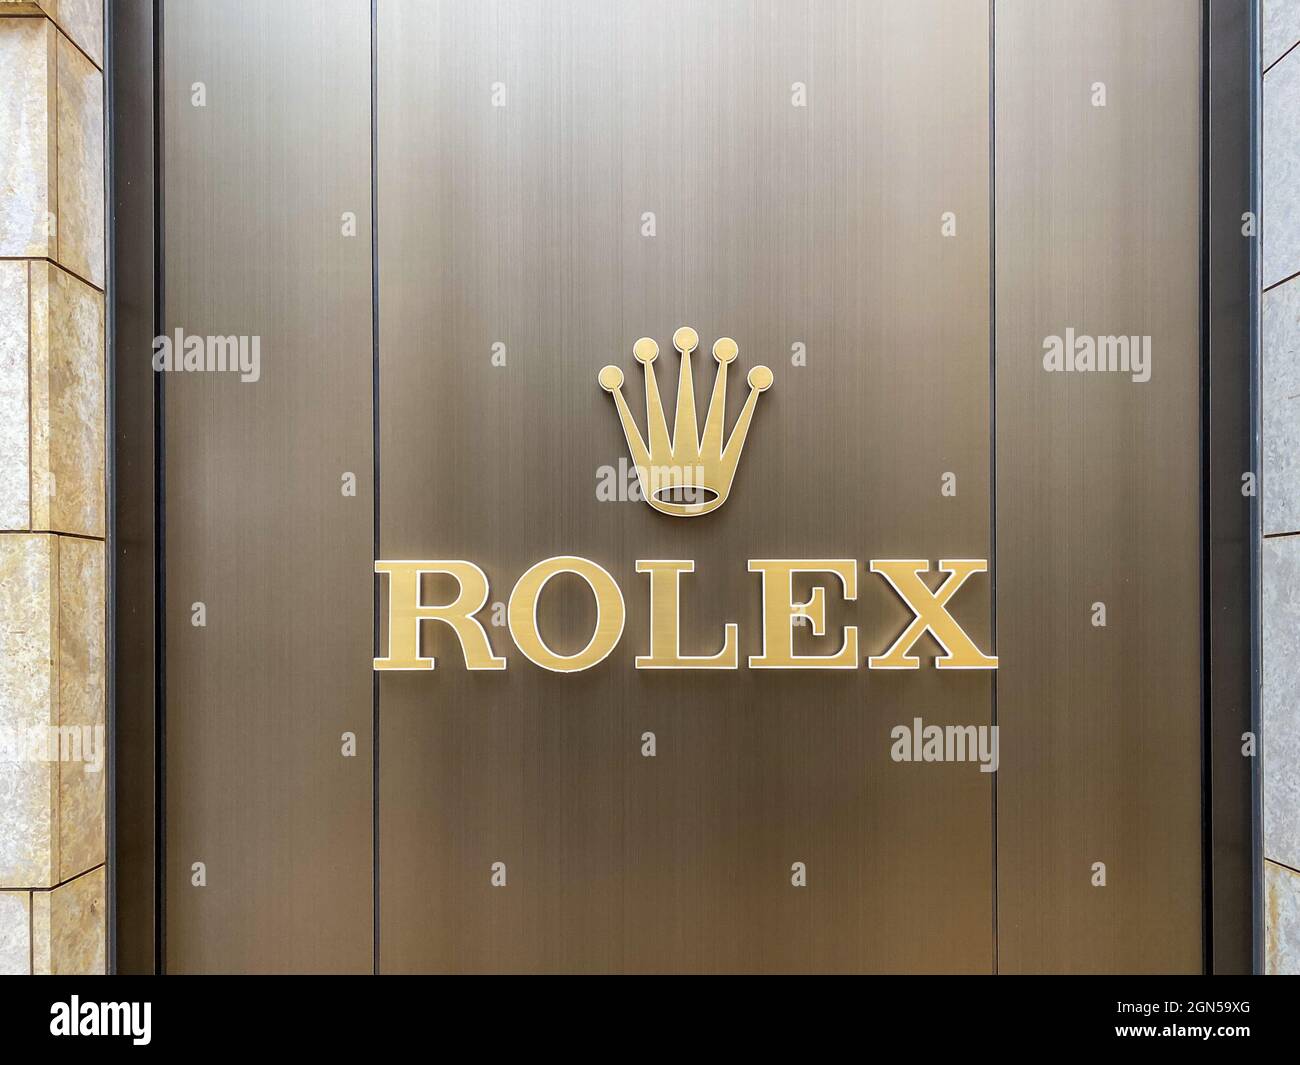 Rolex Retailer High Resolution Stock Photography and Images - Alamy